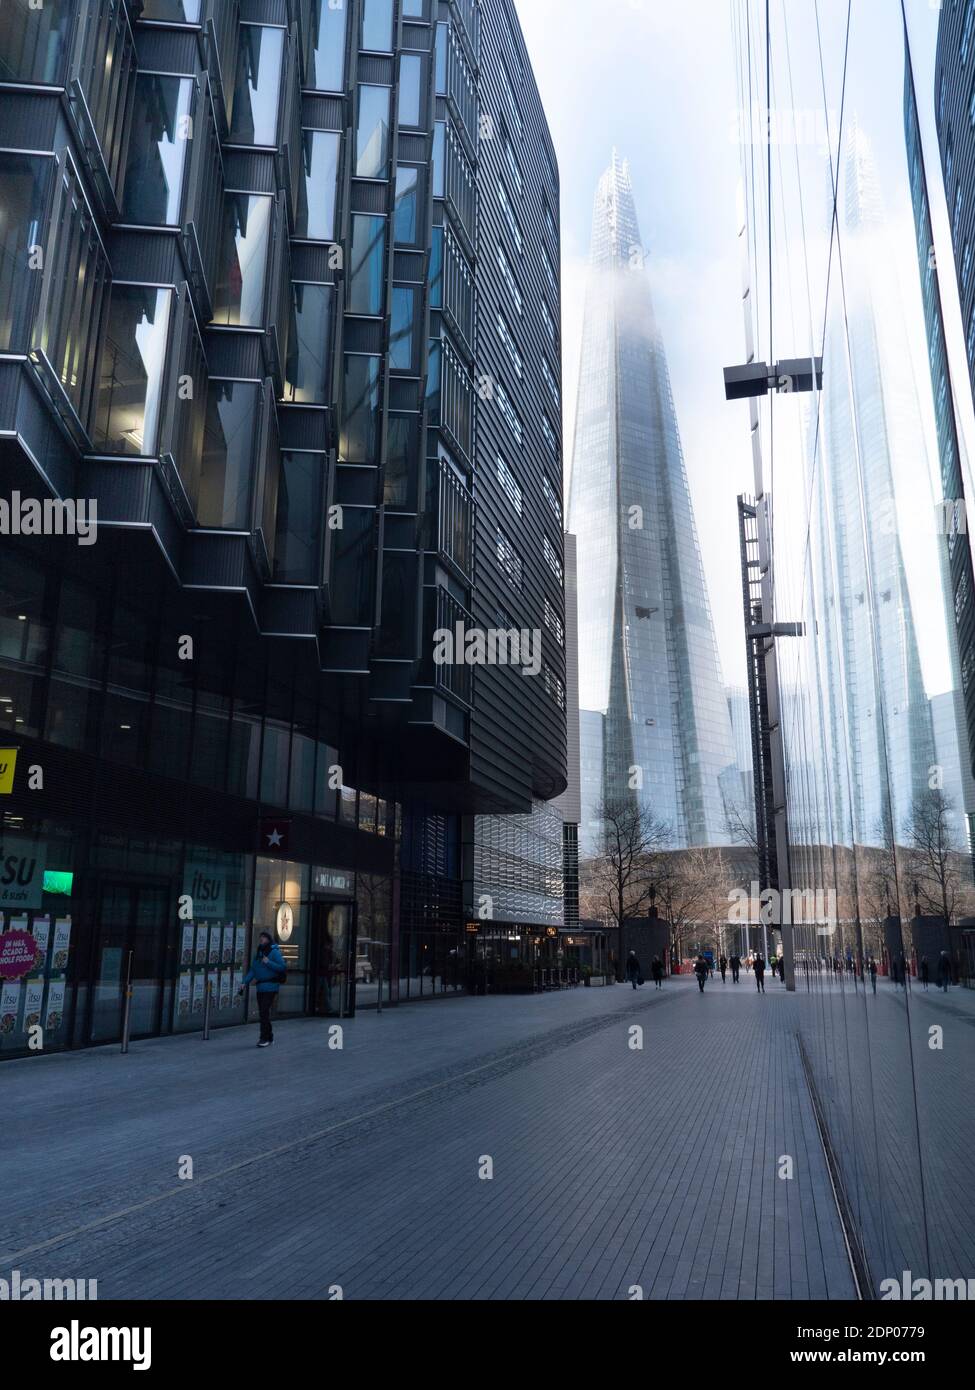 fog, mist in London with the Shard, seen from More  London, London Bridge City, London Stock Photo